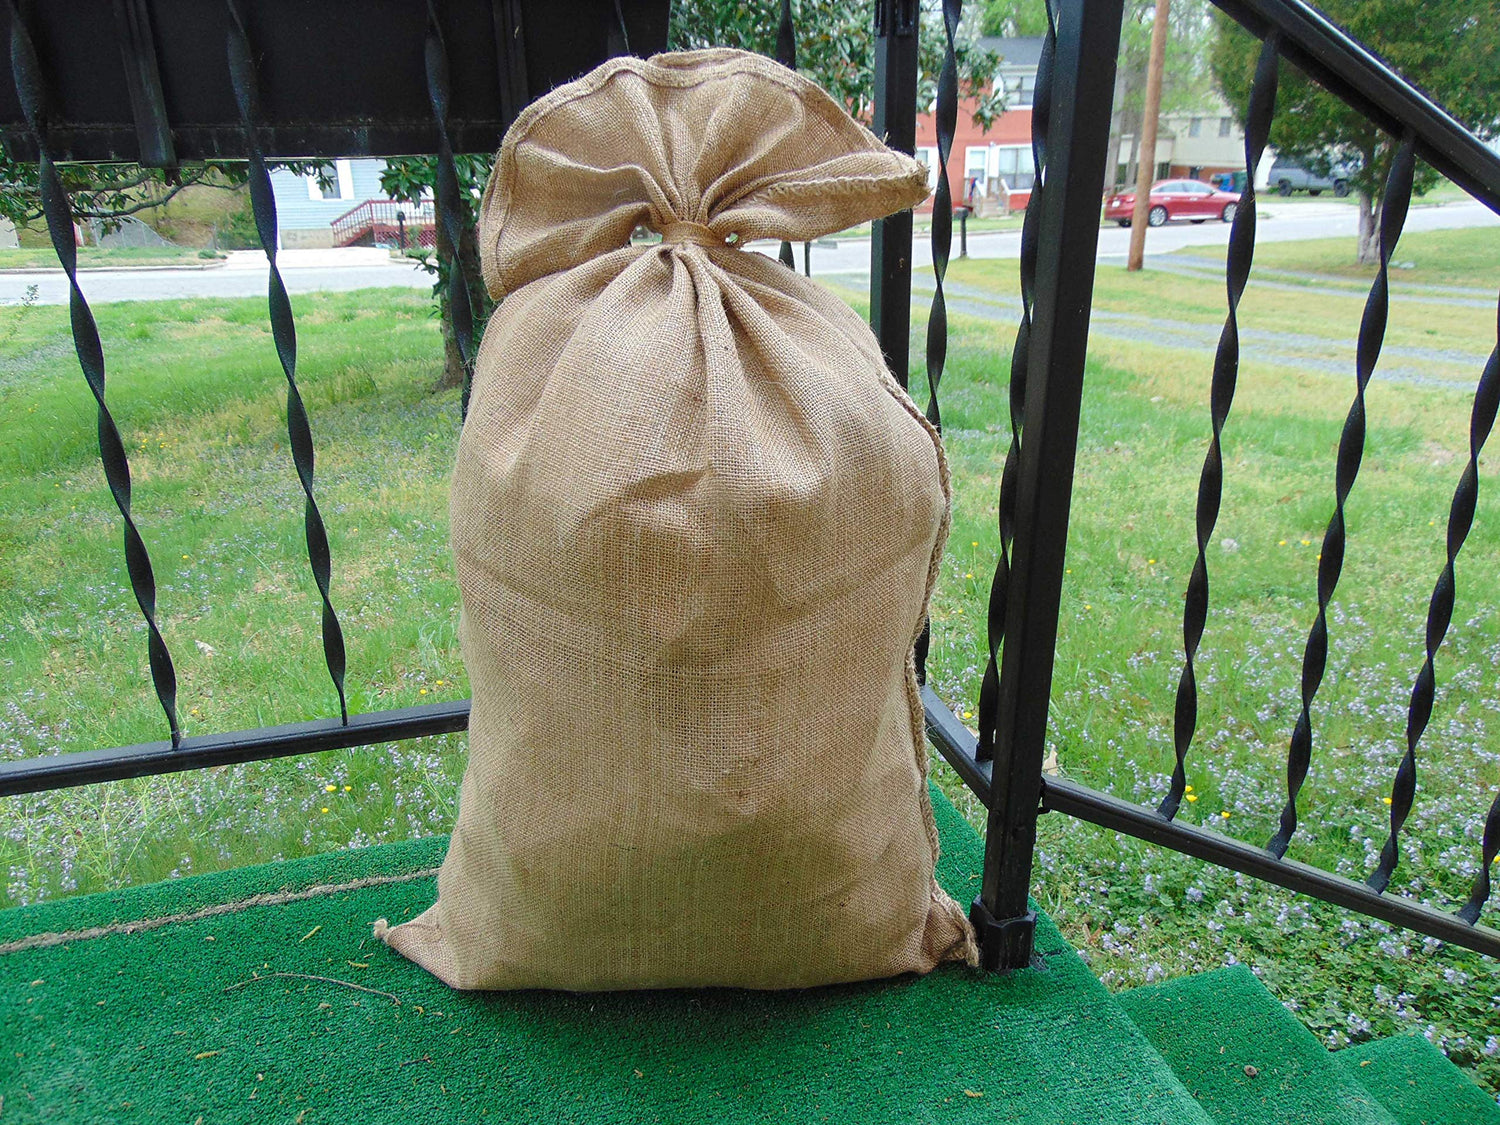 Burlap Gift Bags with Drawstring